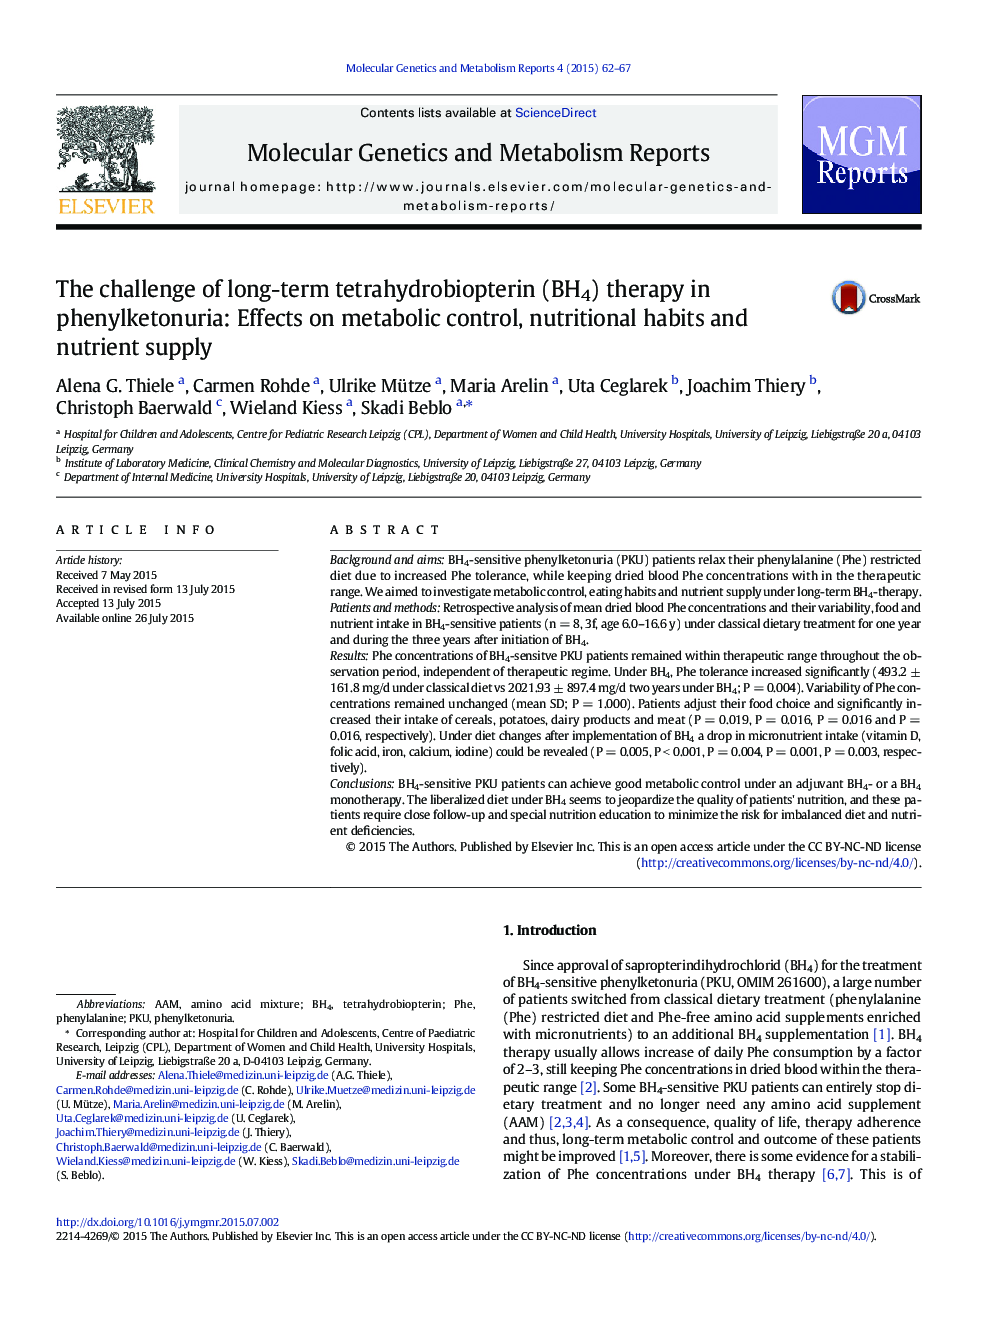 The challenge of long-term tetrahydrobiopterin (BH4) therapy in phenylketonuria: Effects on metabolic control, nutritional habits and nutrient supply